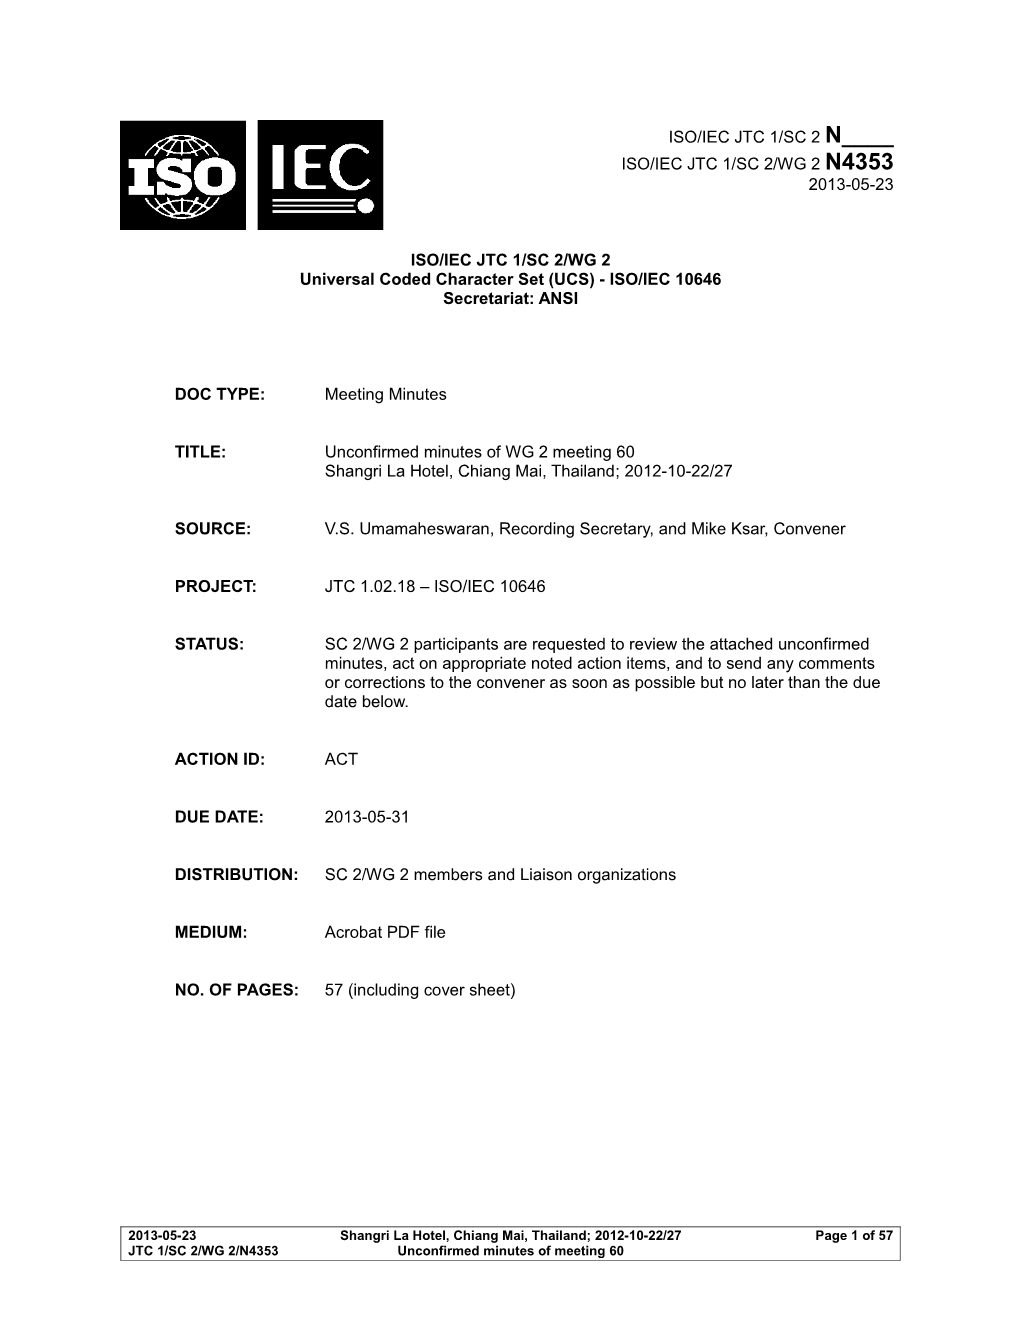 Universal Coded Character Set (UCS) - ISO/IEC 10646